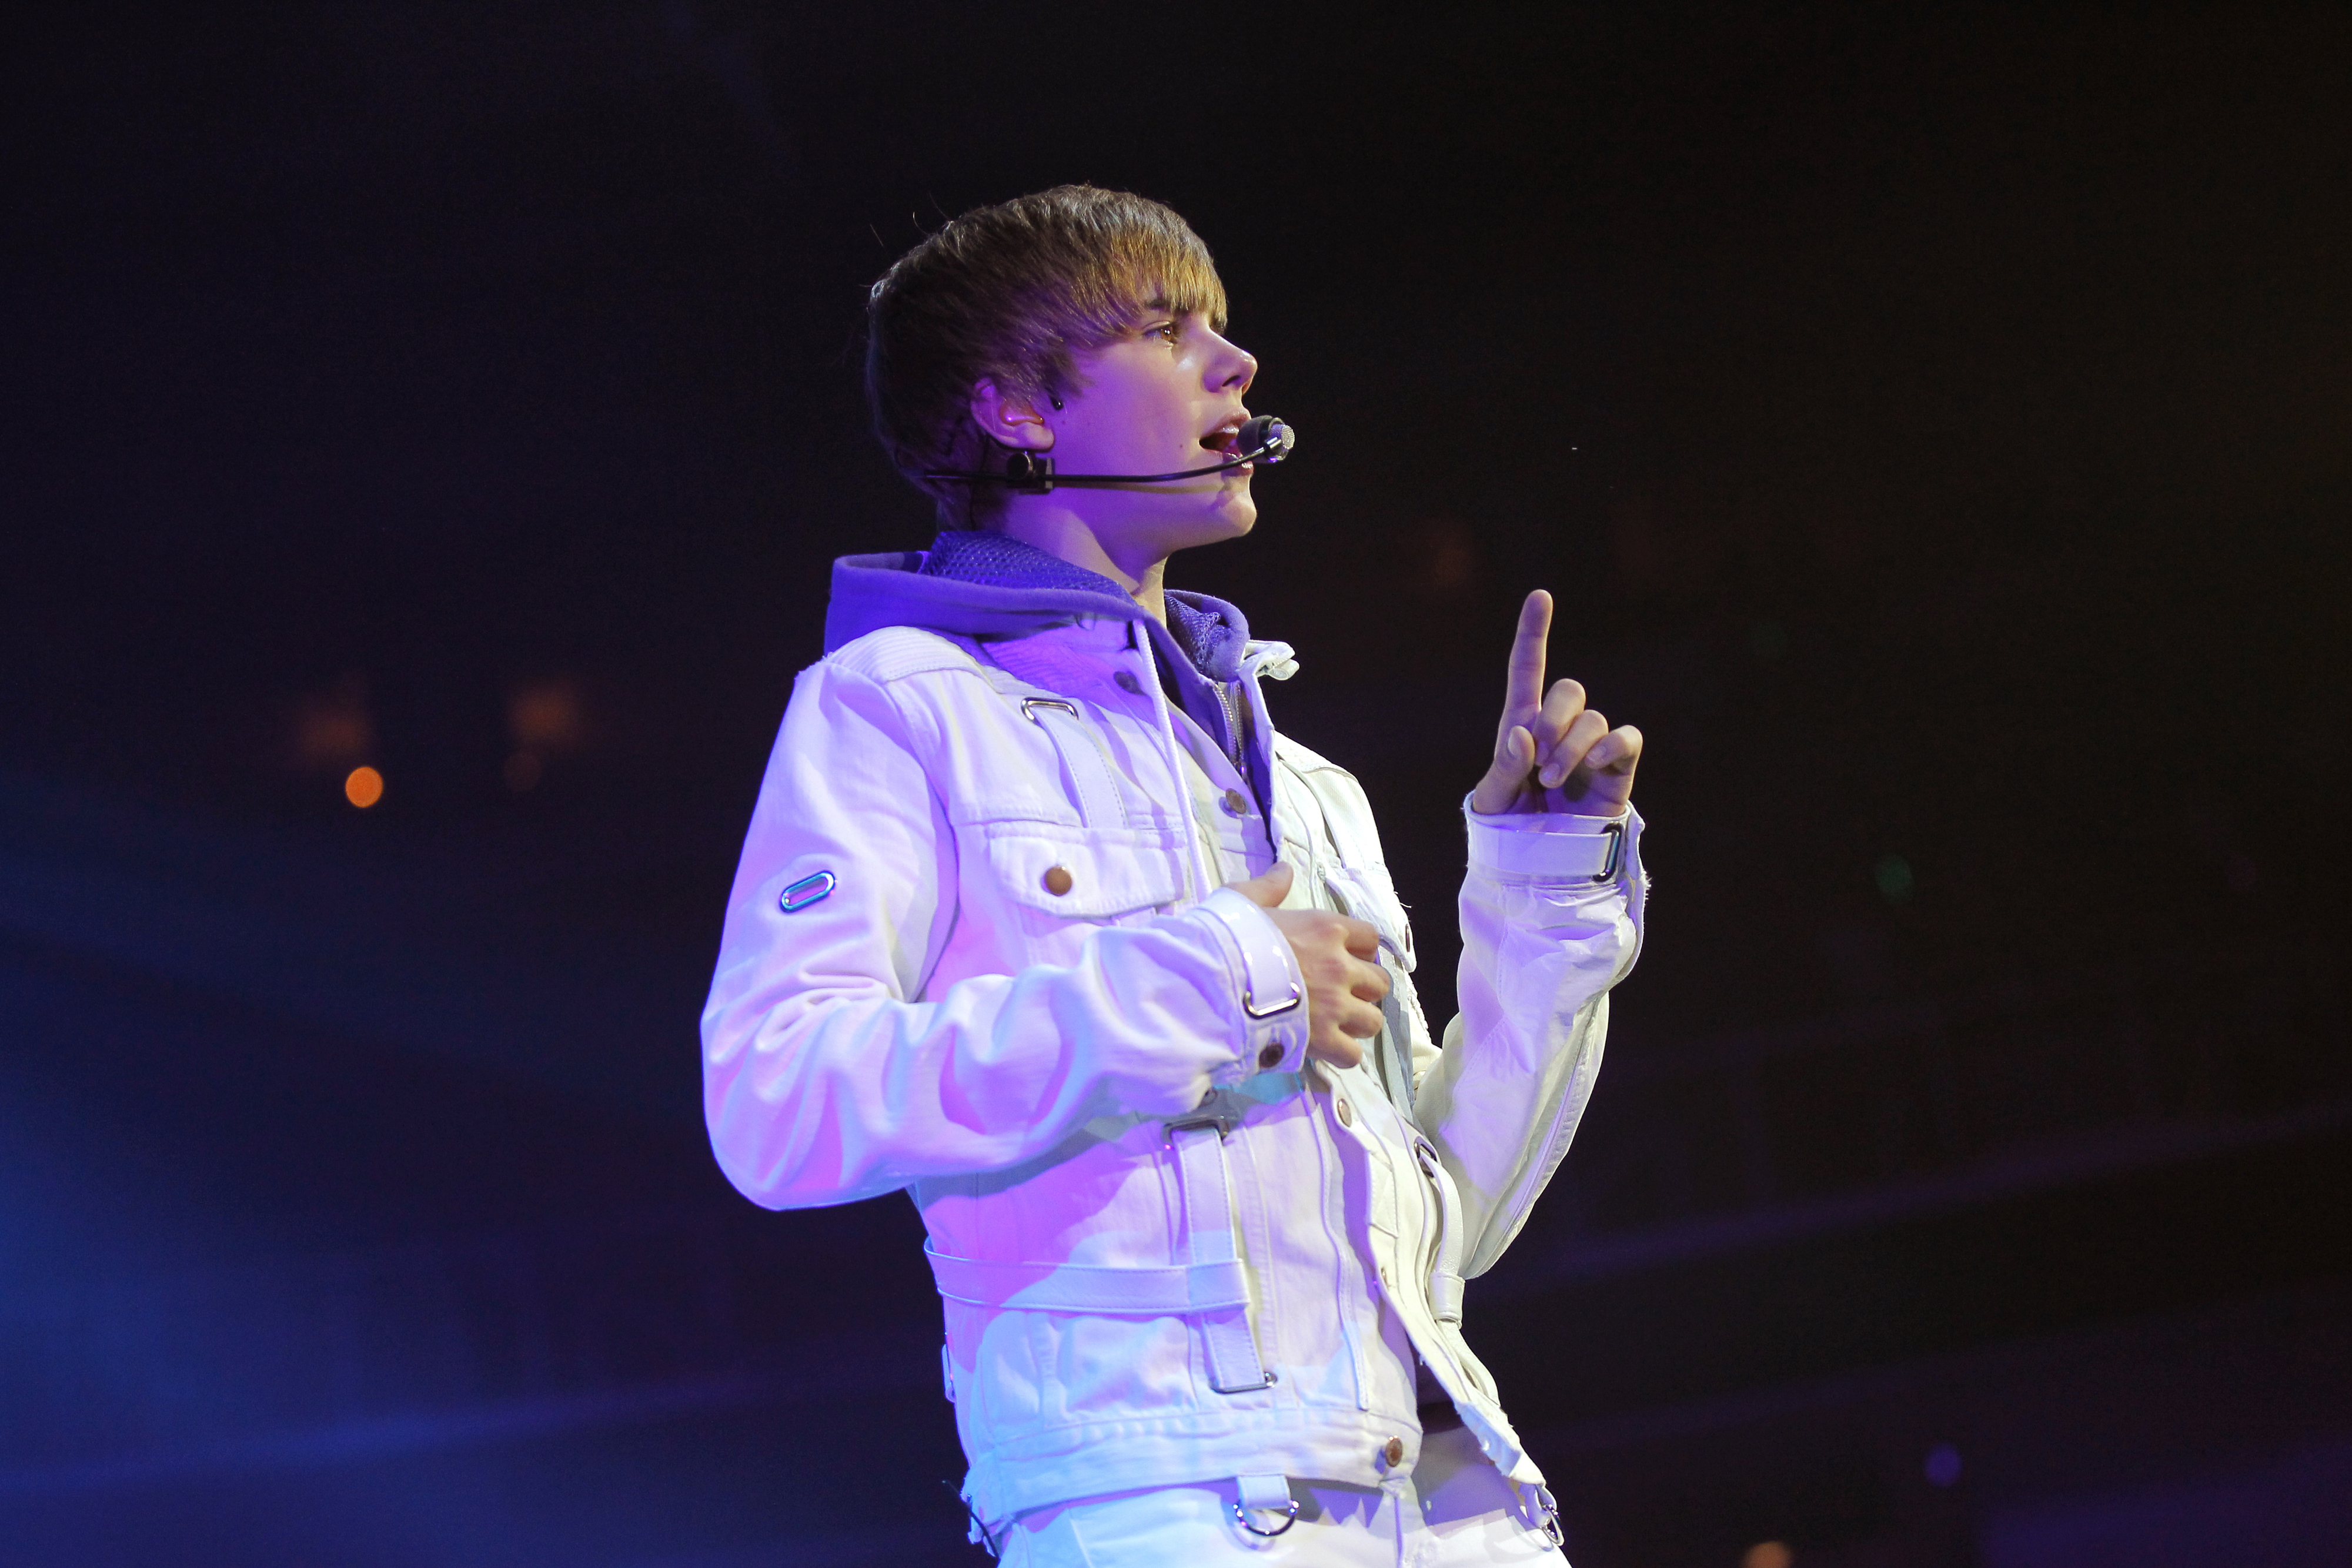 Close-up of Justin as a teen performing